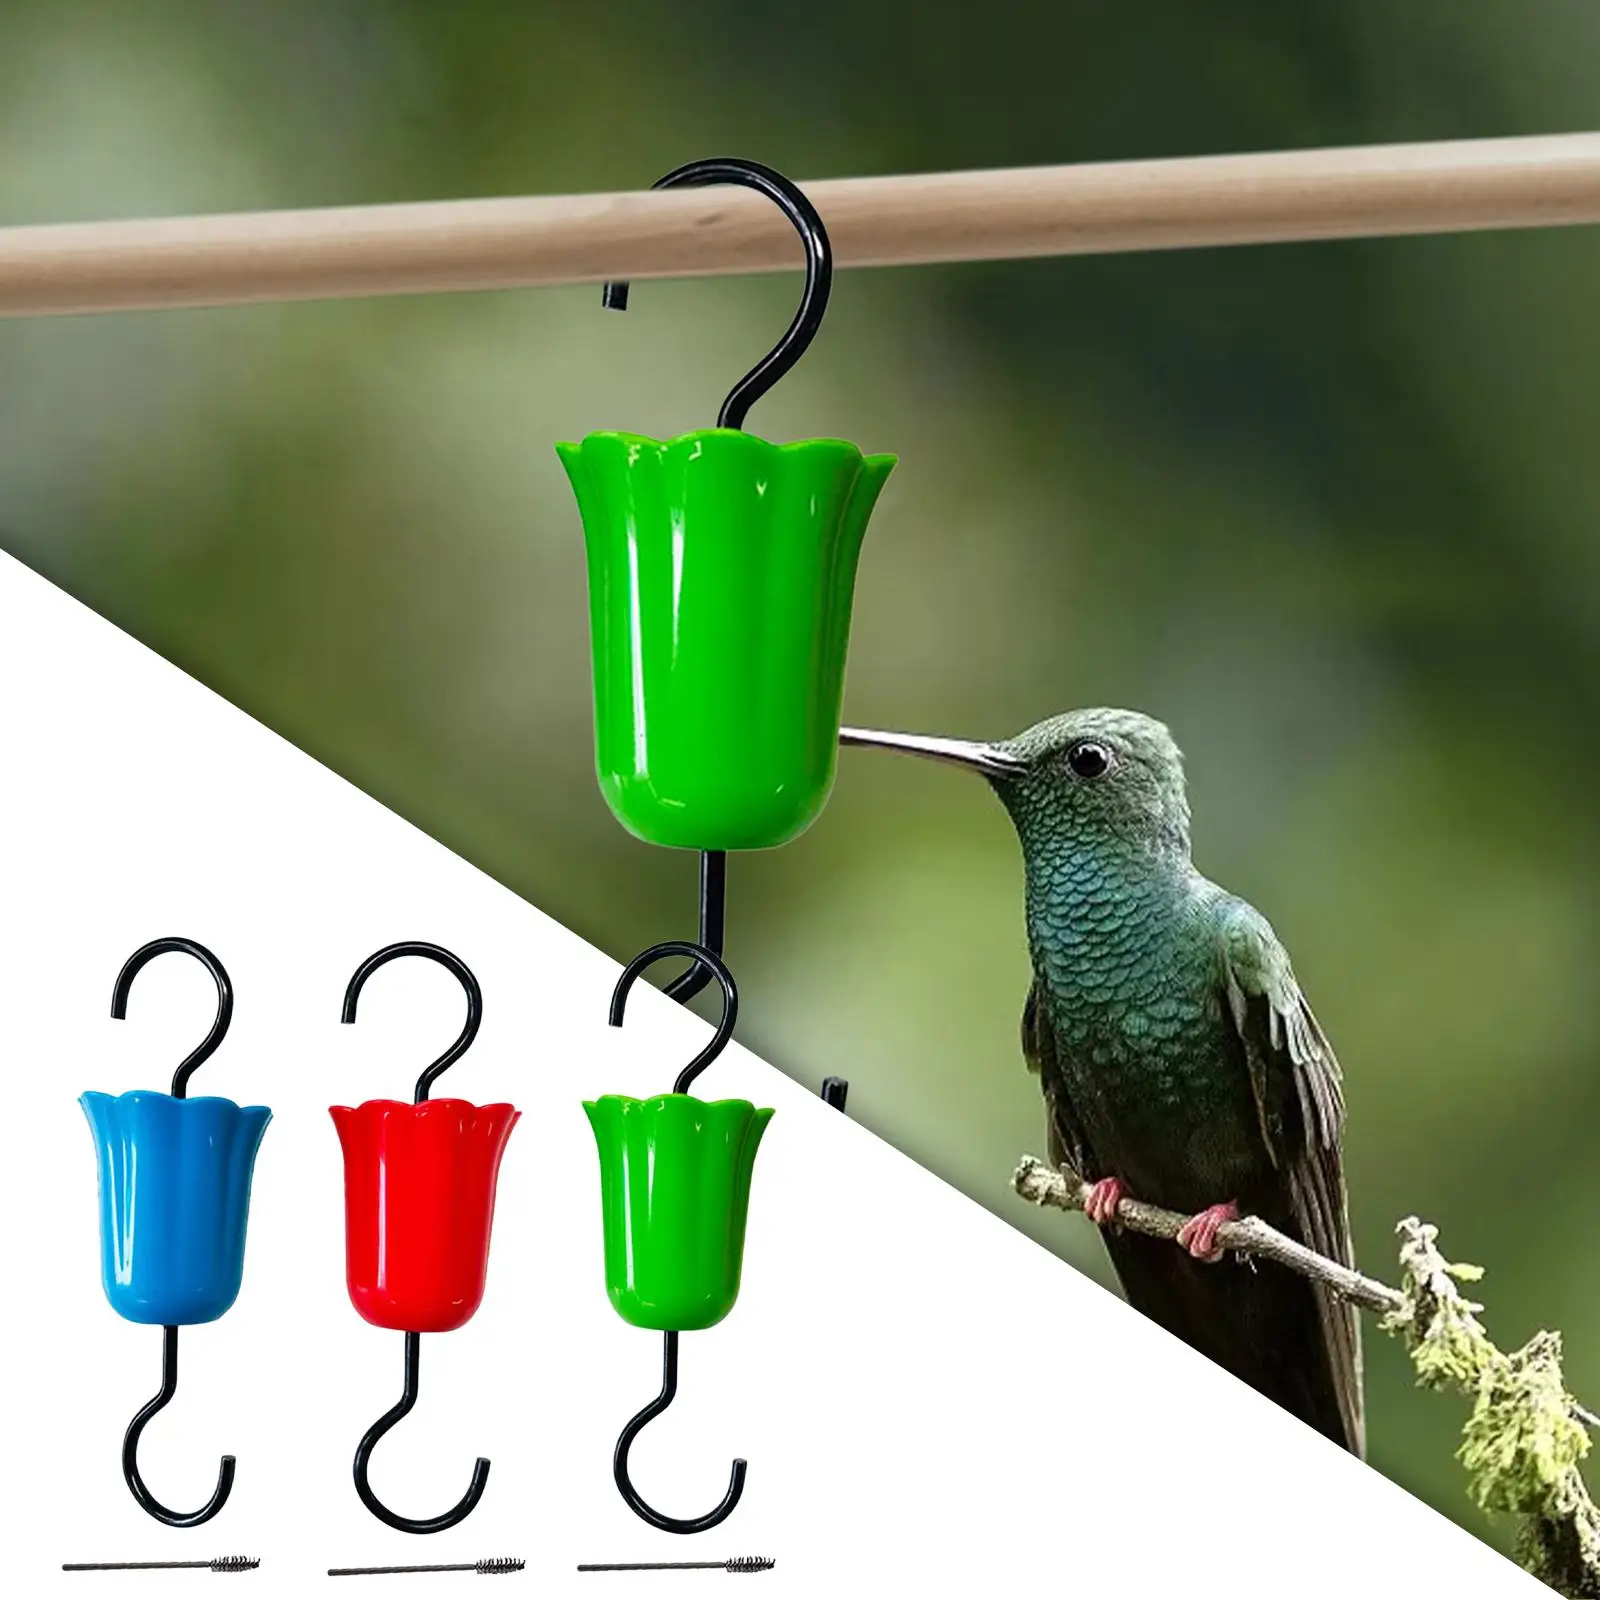 3Pcs Portable Garden Hook with Cleaning Brush Trap Hooks for Outdoor Patio Lawn Wildlife Terrace